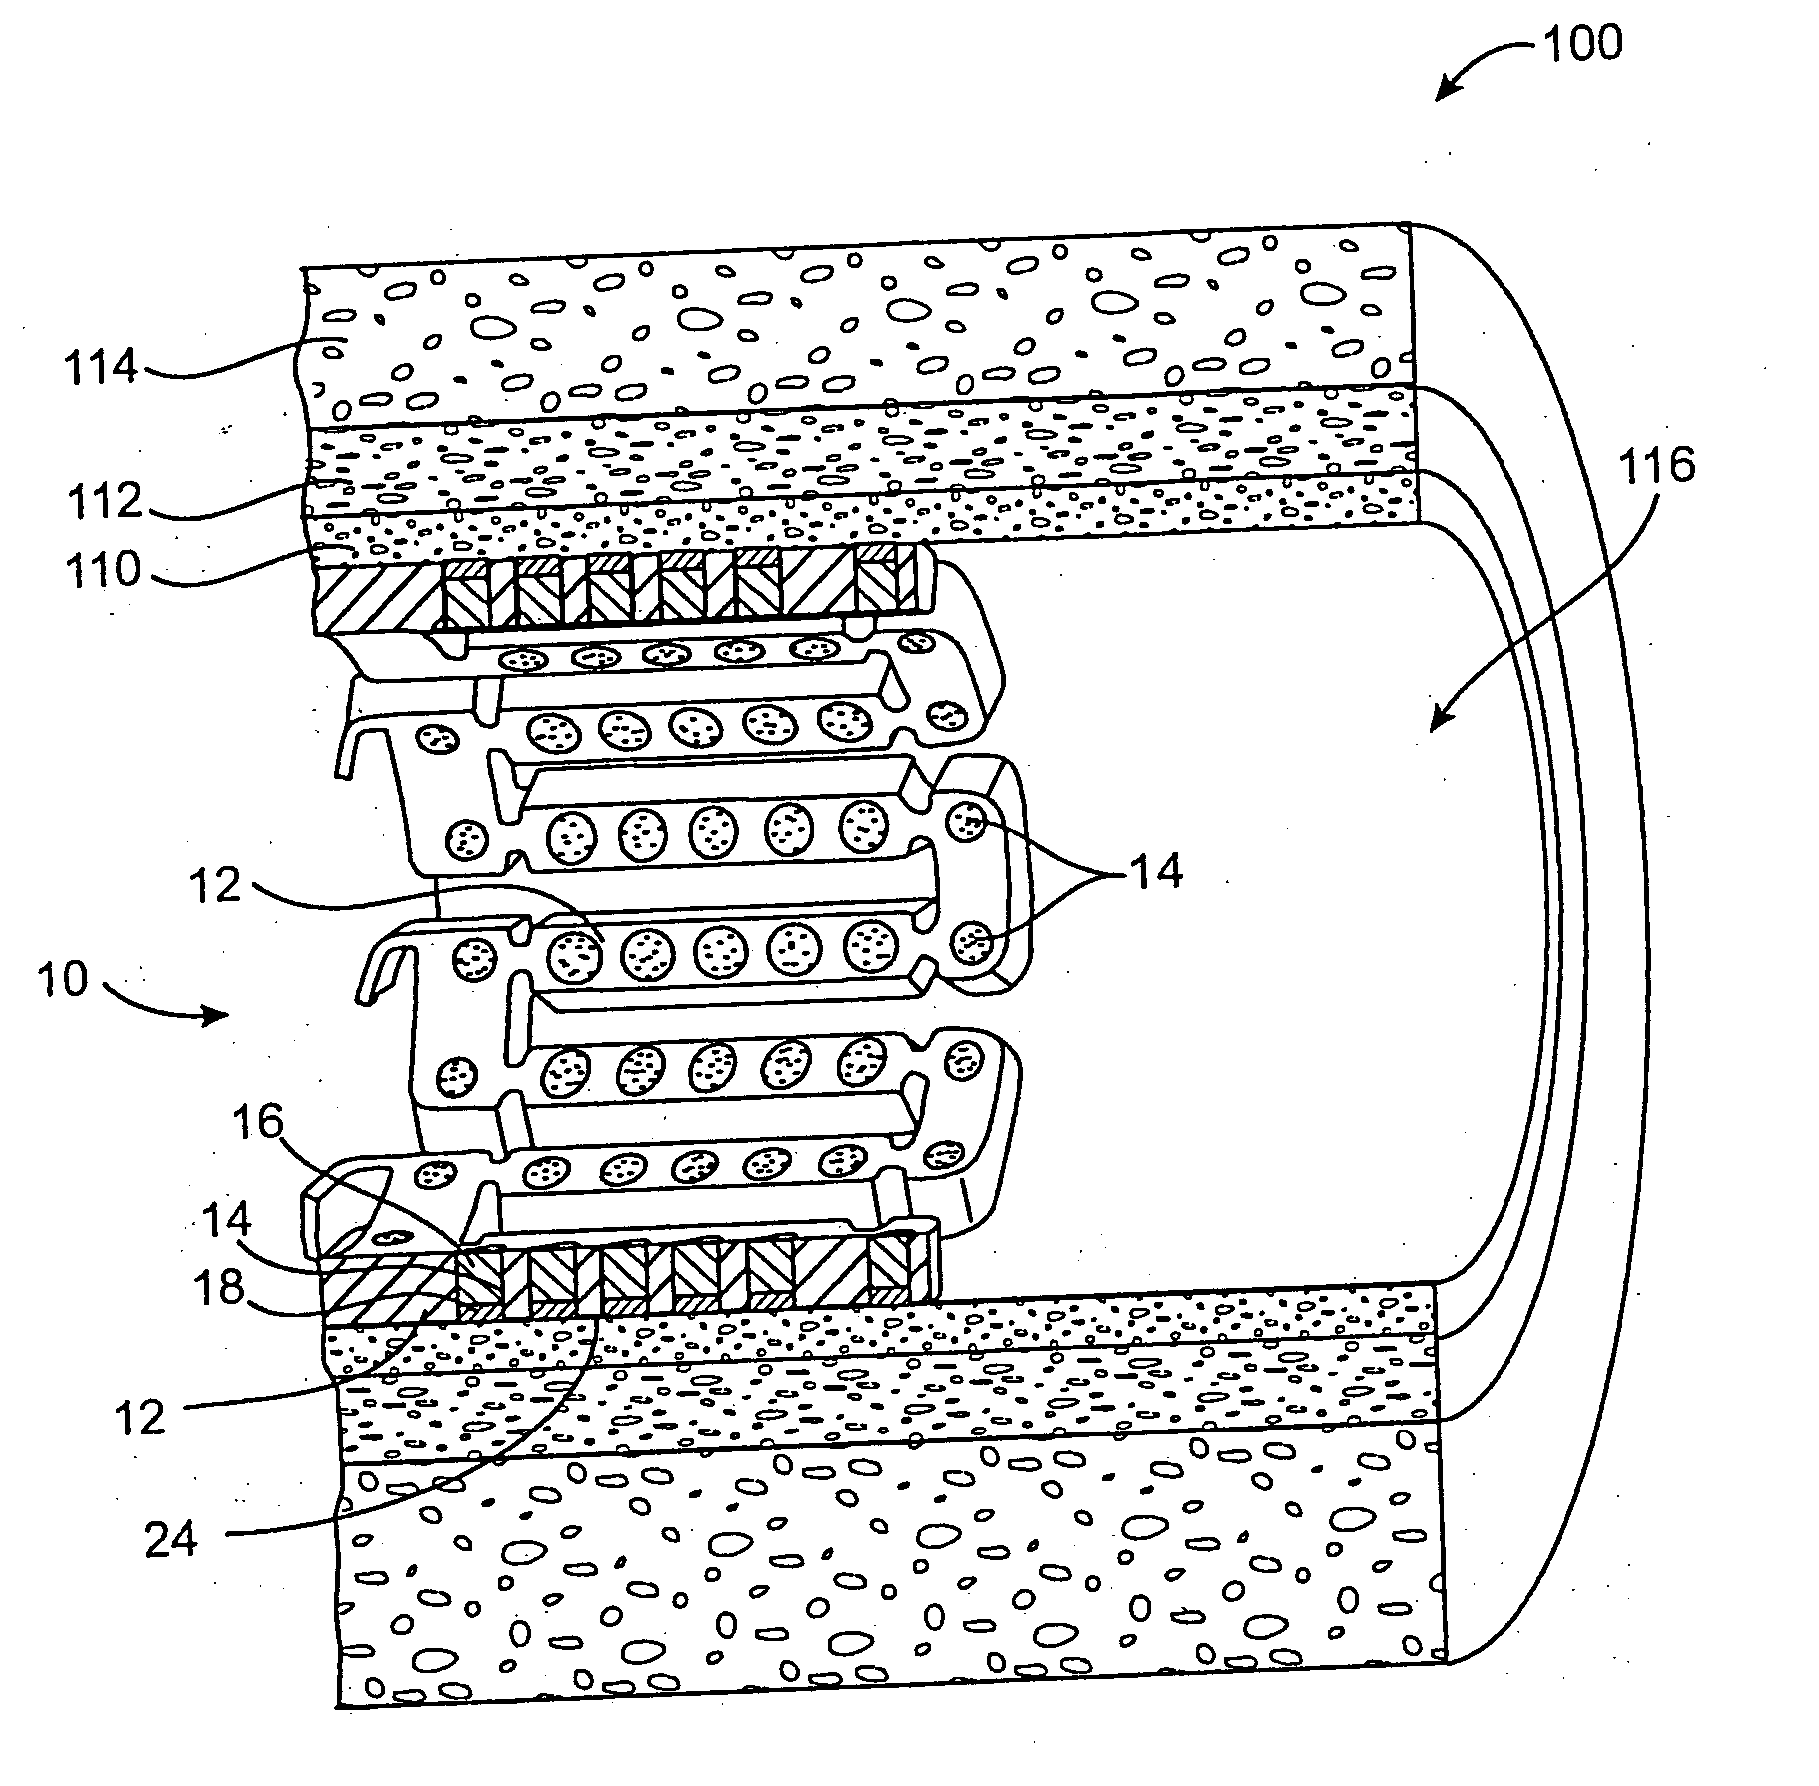 Method and apparatus for reducing tissue damage after ischemic injury